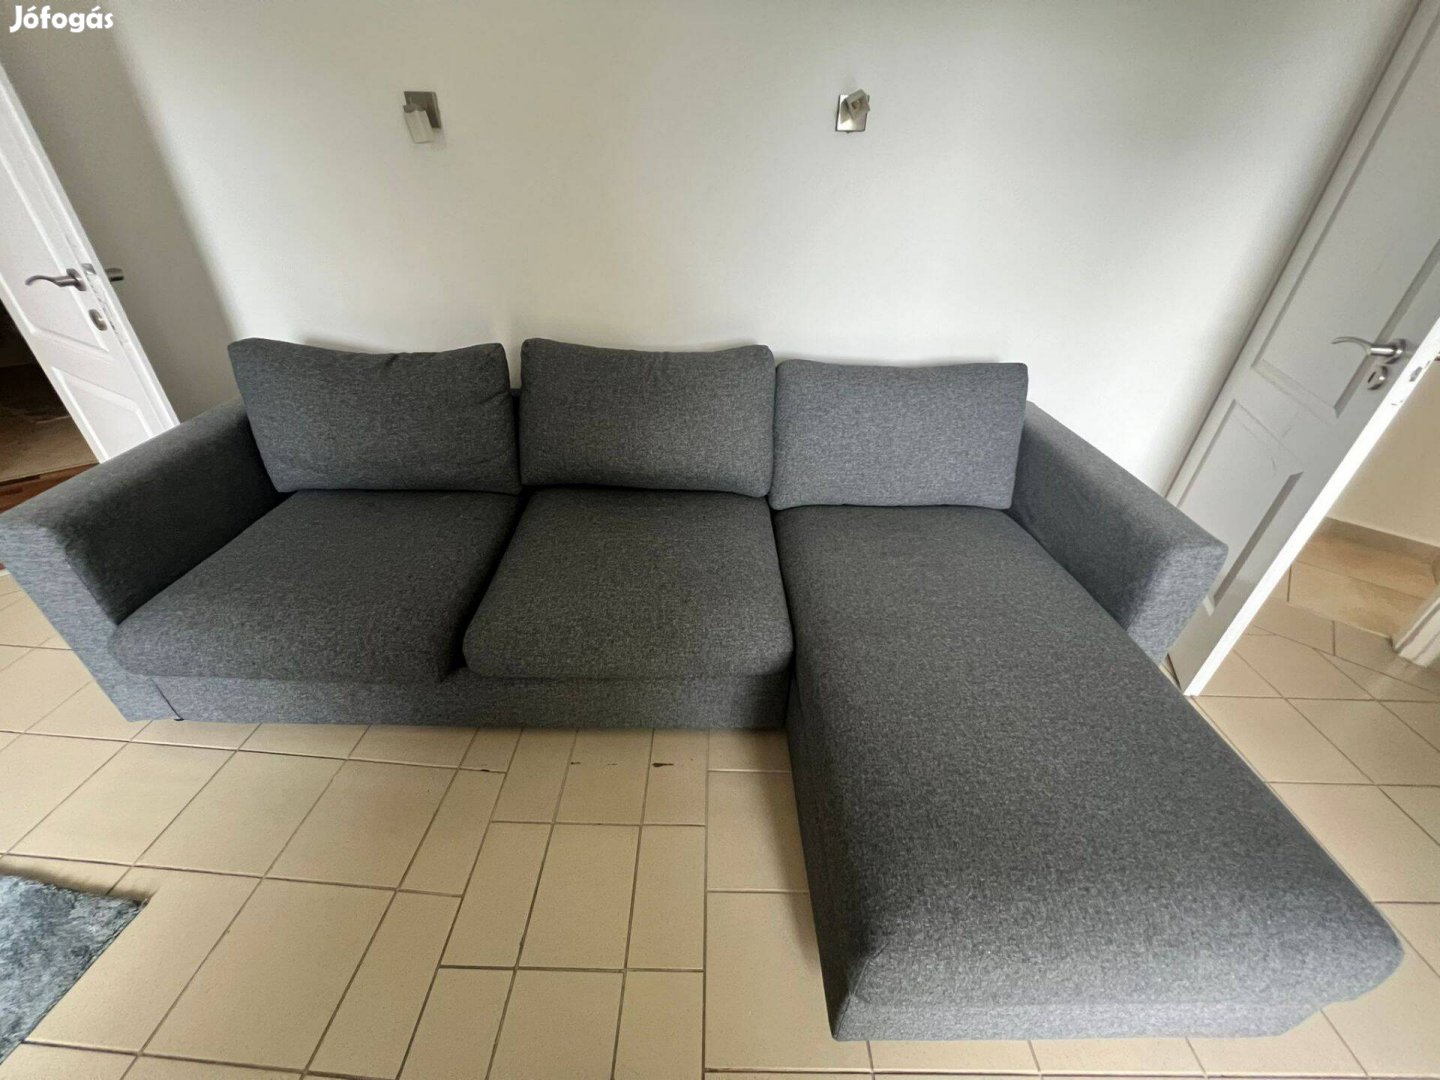 L Seat might be sofa bed